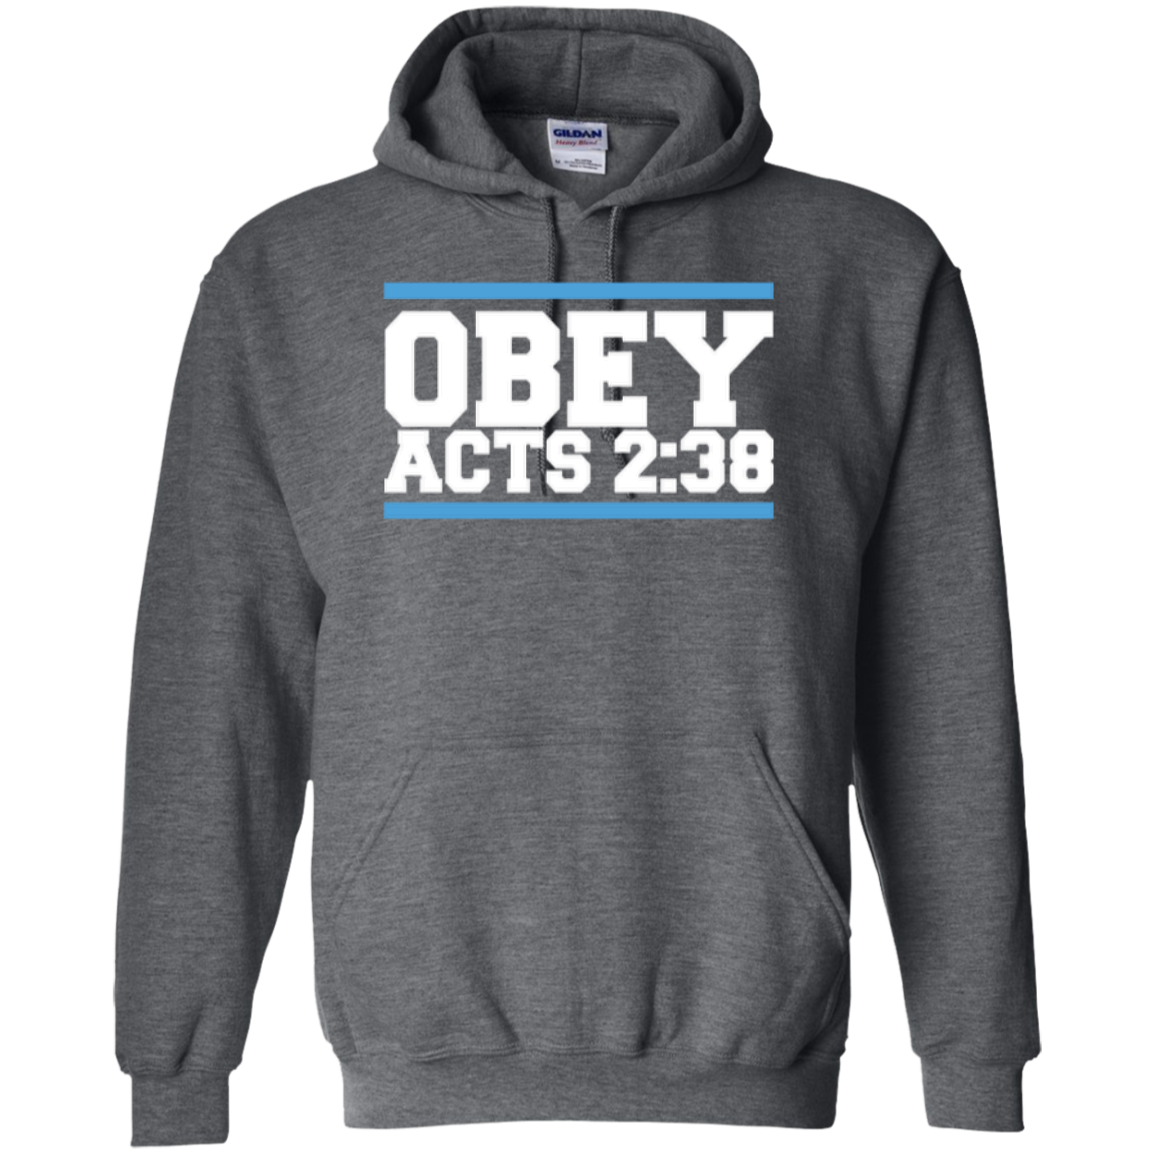 Obey Acts 2:38 - Pullover Hoodie - Kick Merch - 2